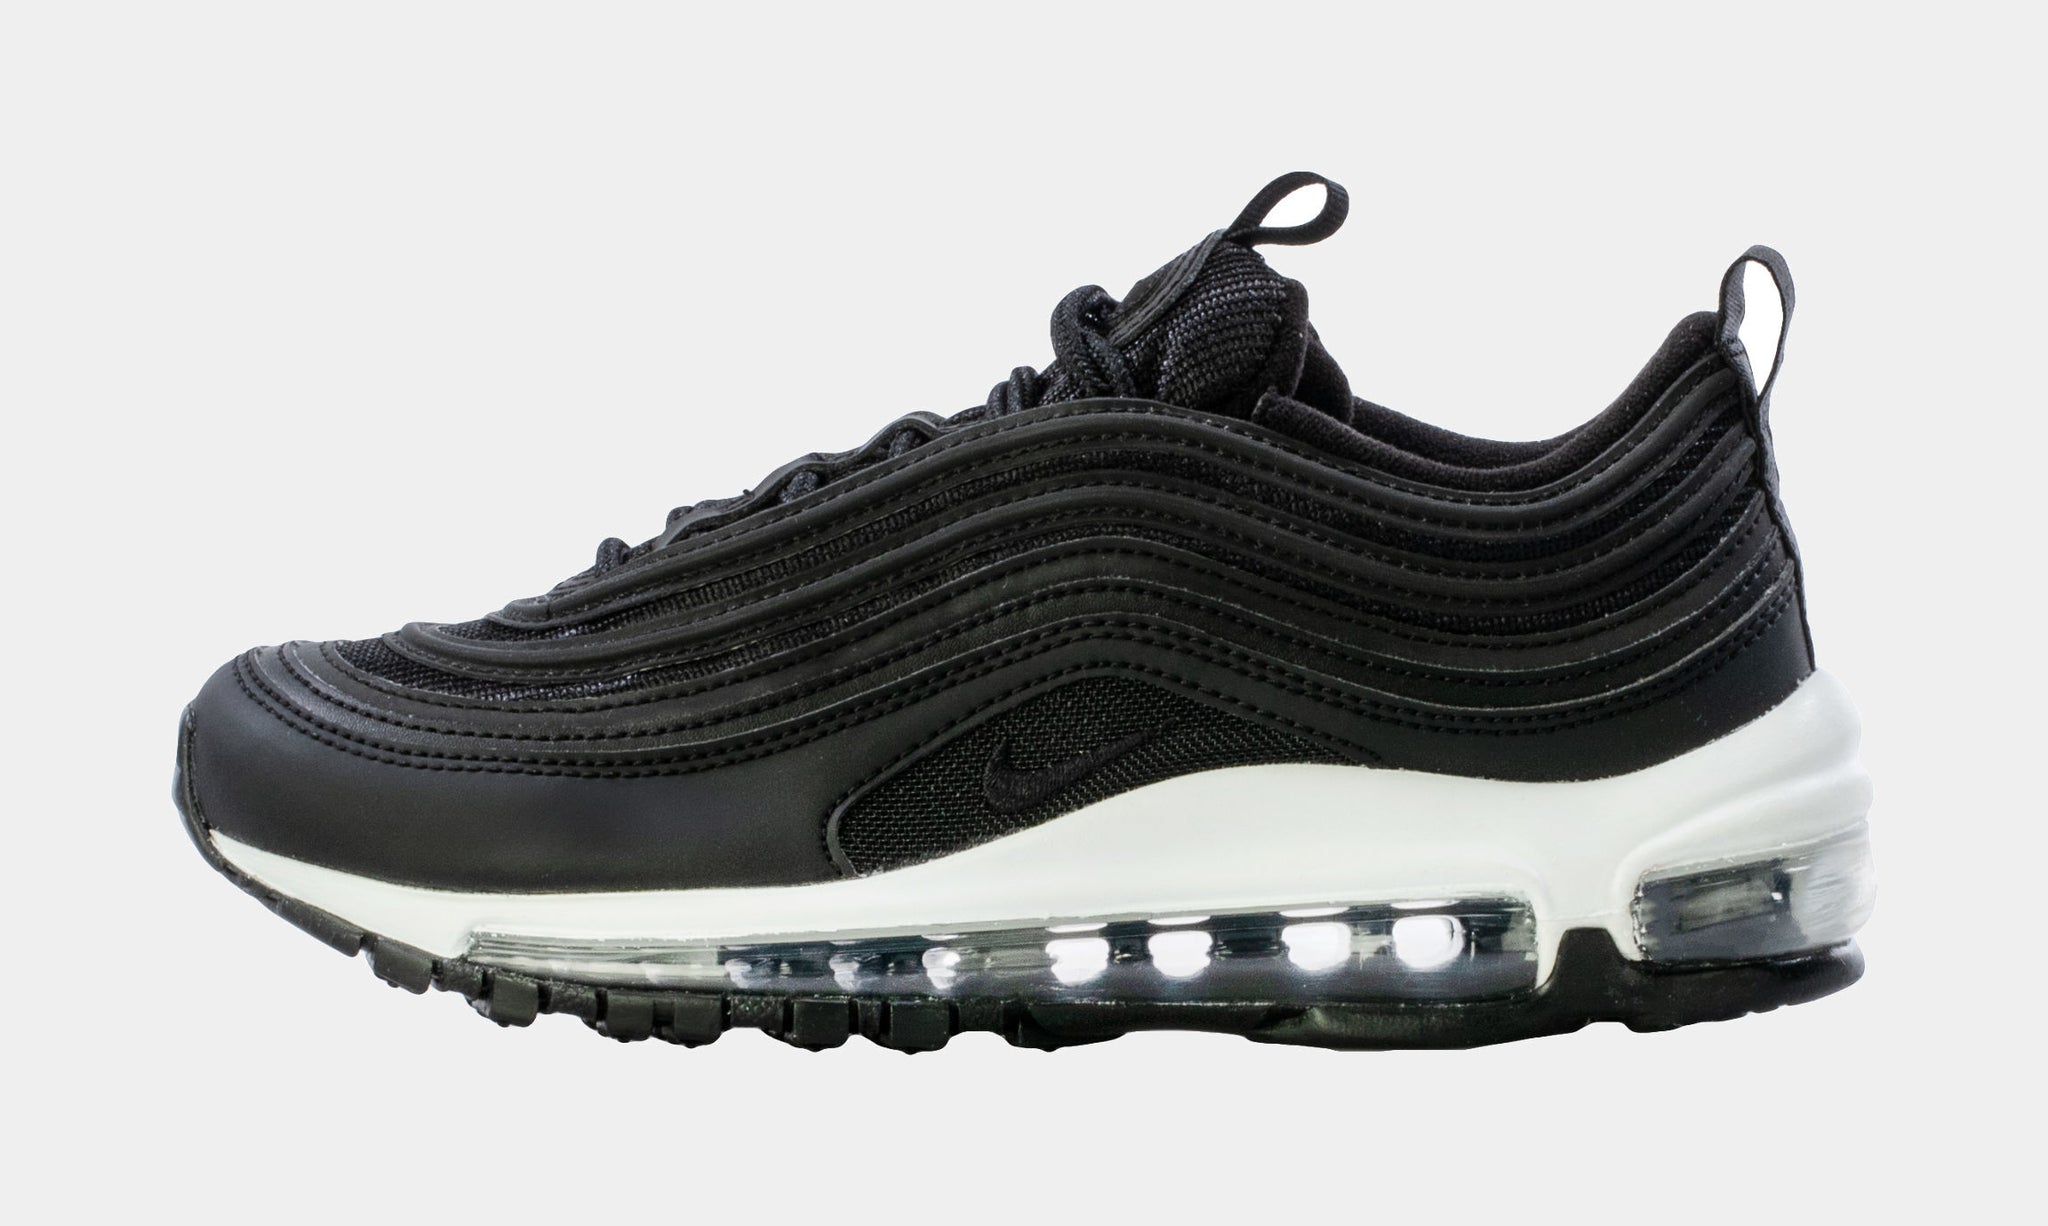 Nike Women's Air Max 97 Shoes in Black, Size: 8.5 | Dh8016-002